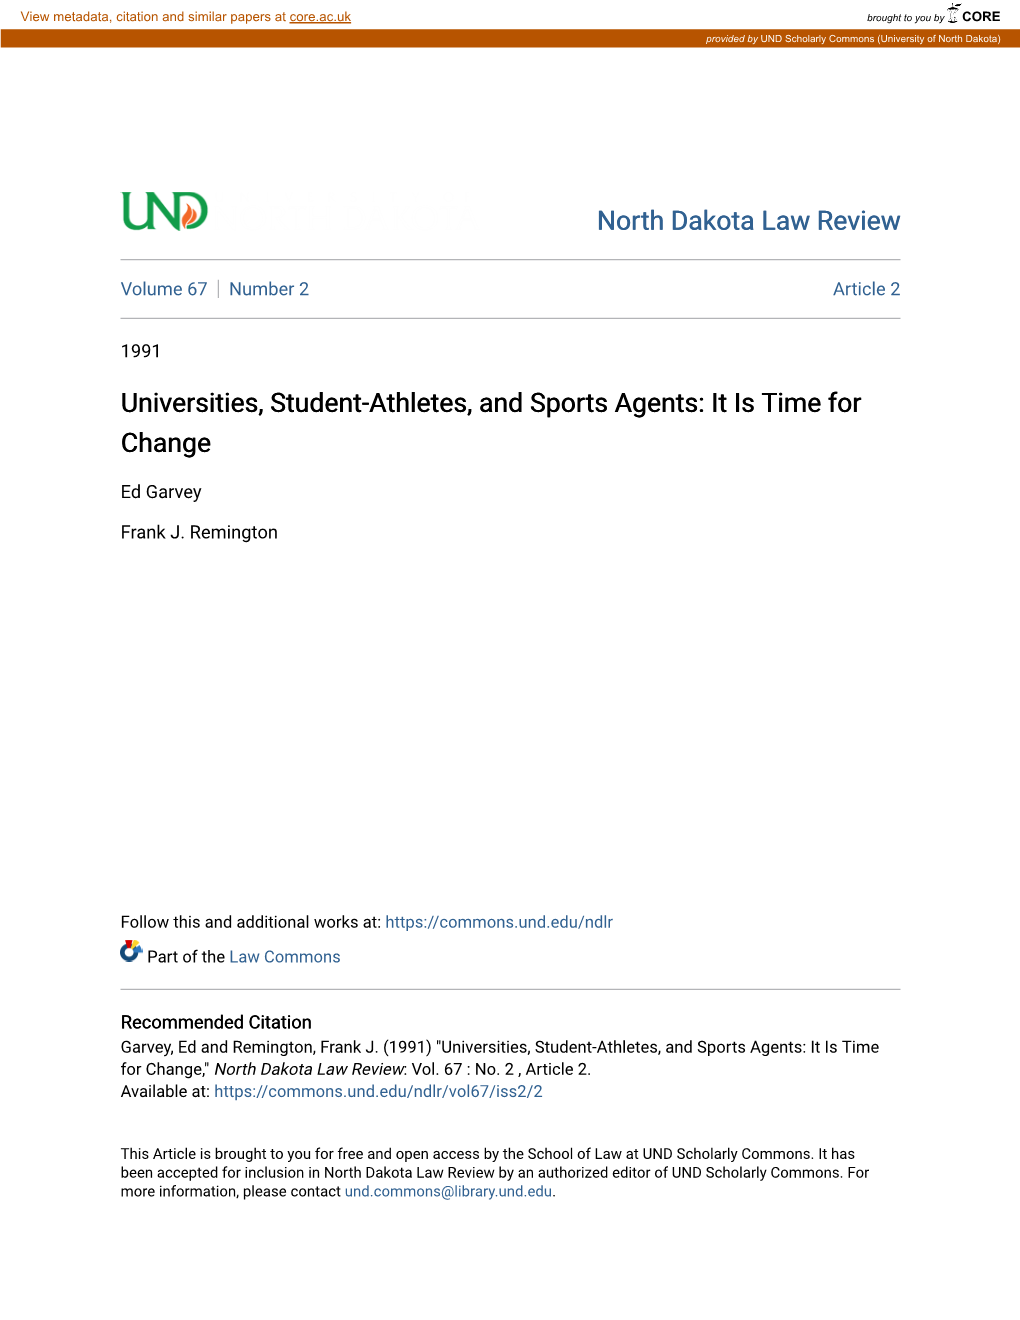 Universities, Student-Athletes, and Sports Agents: It Is Time for Change